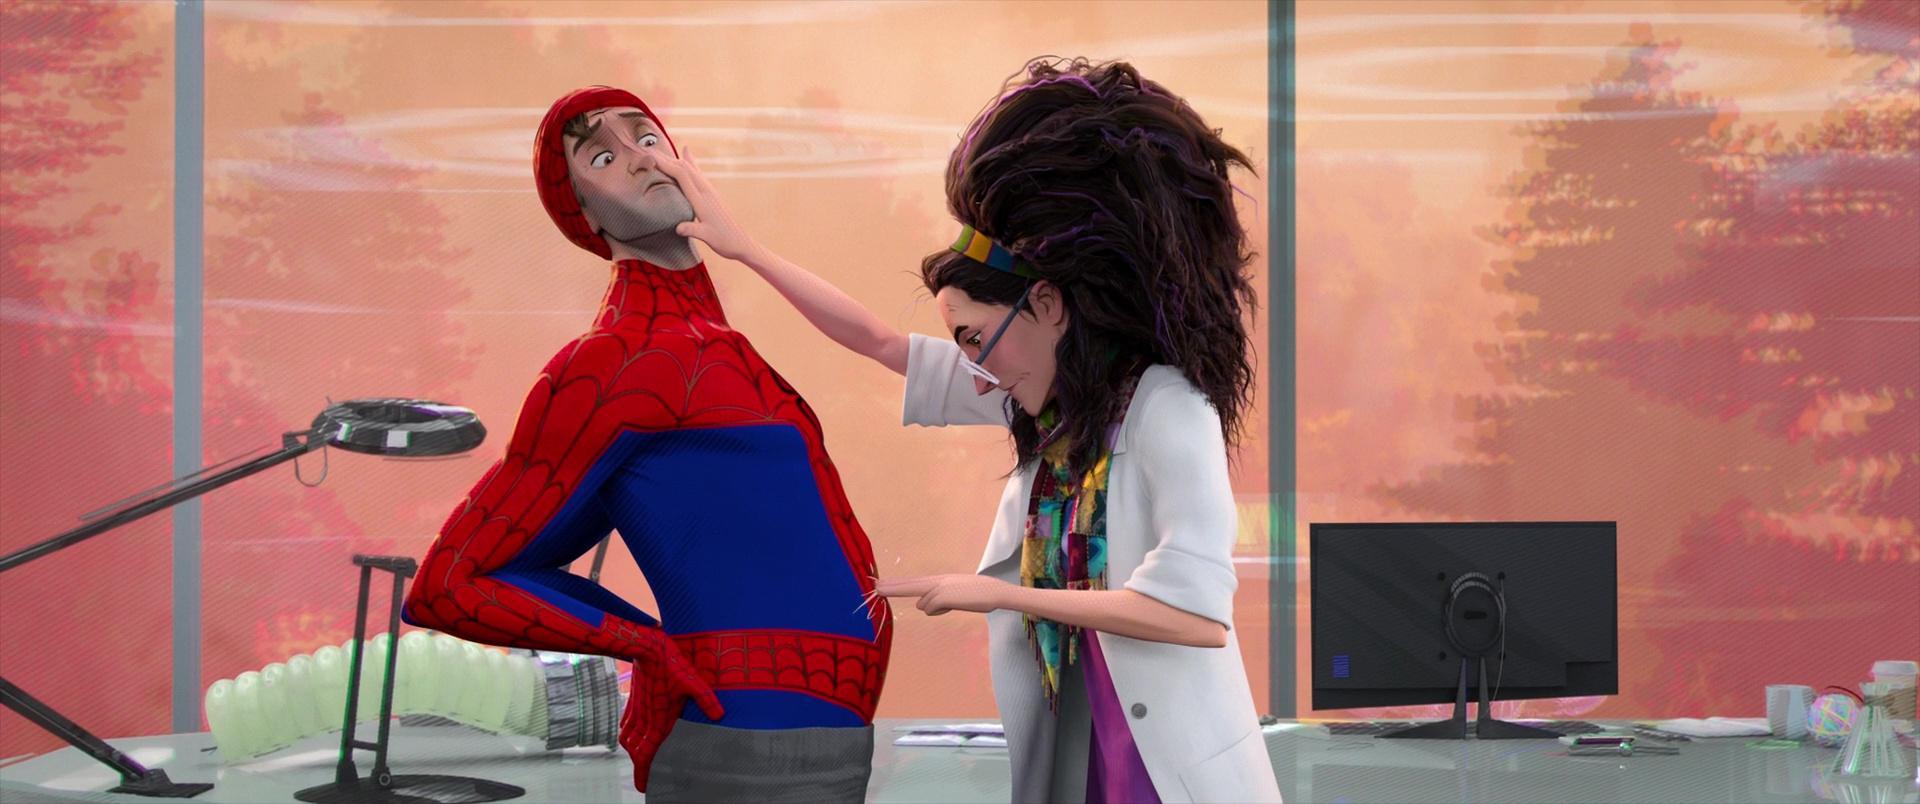 Image gallery for Spider-Man: Into the Spider-Verse - FilmAffinity